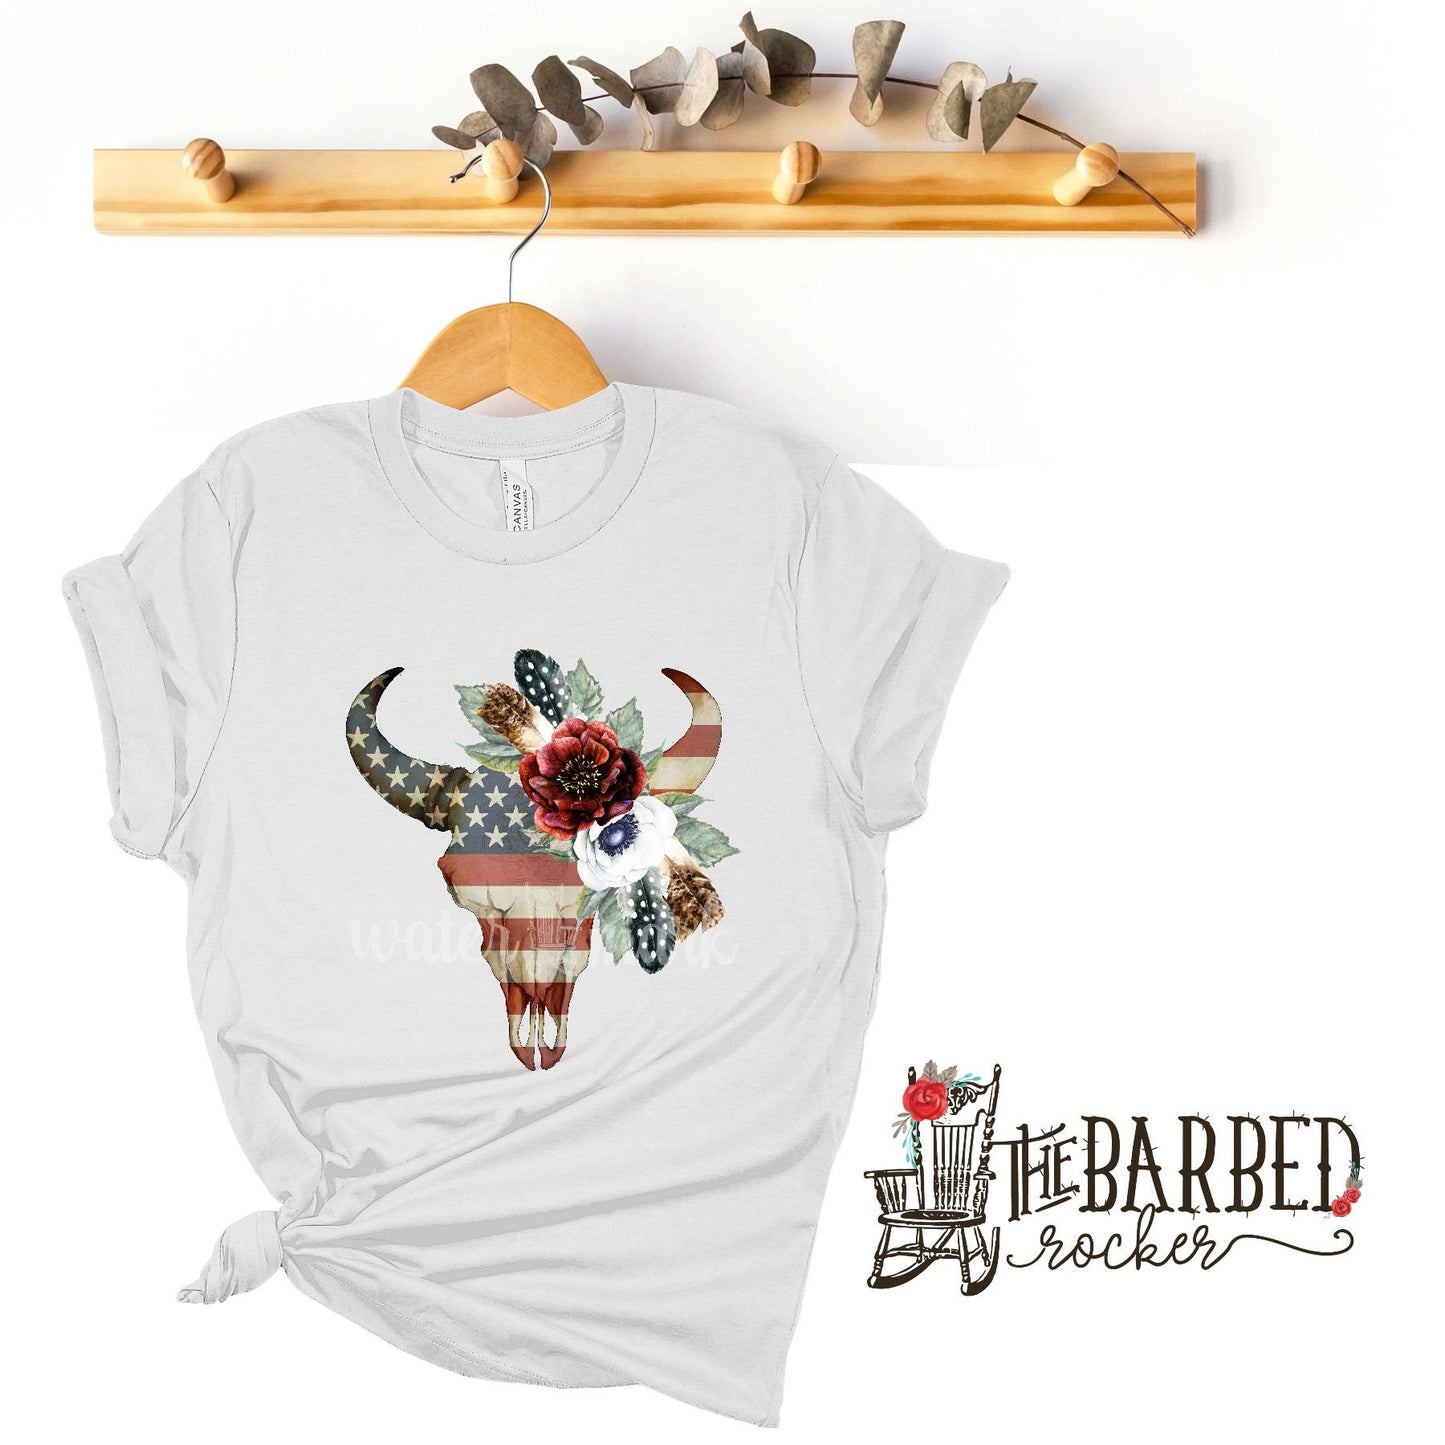 Patriotic American Bull Skull w Flowers / Feathers T-Shirt 4th of July, Americana, Celebration